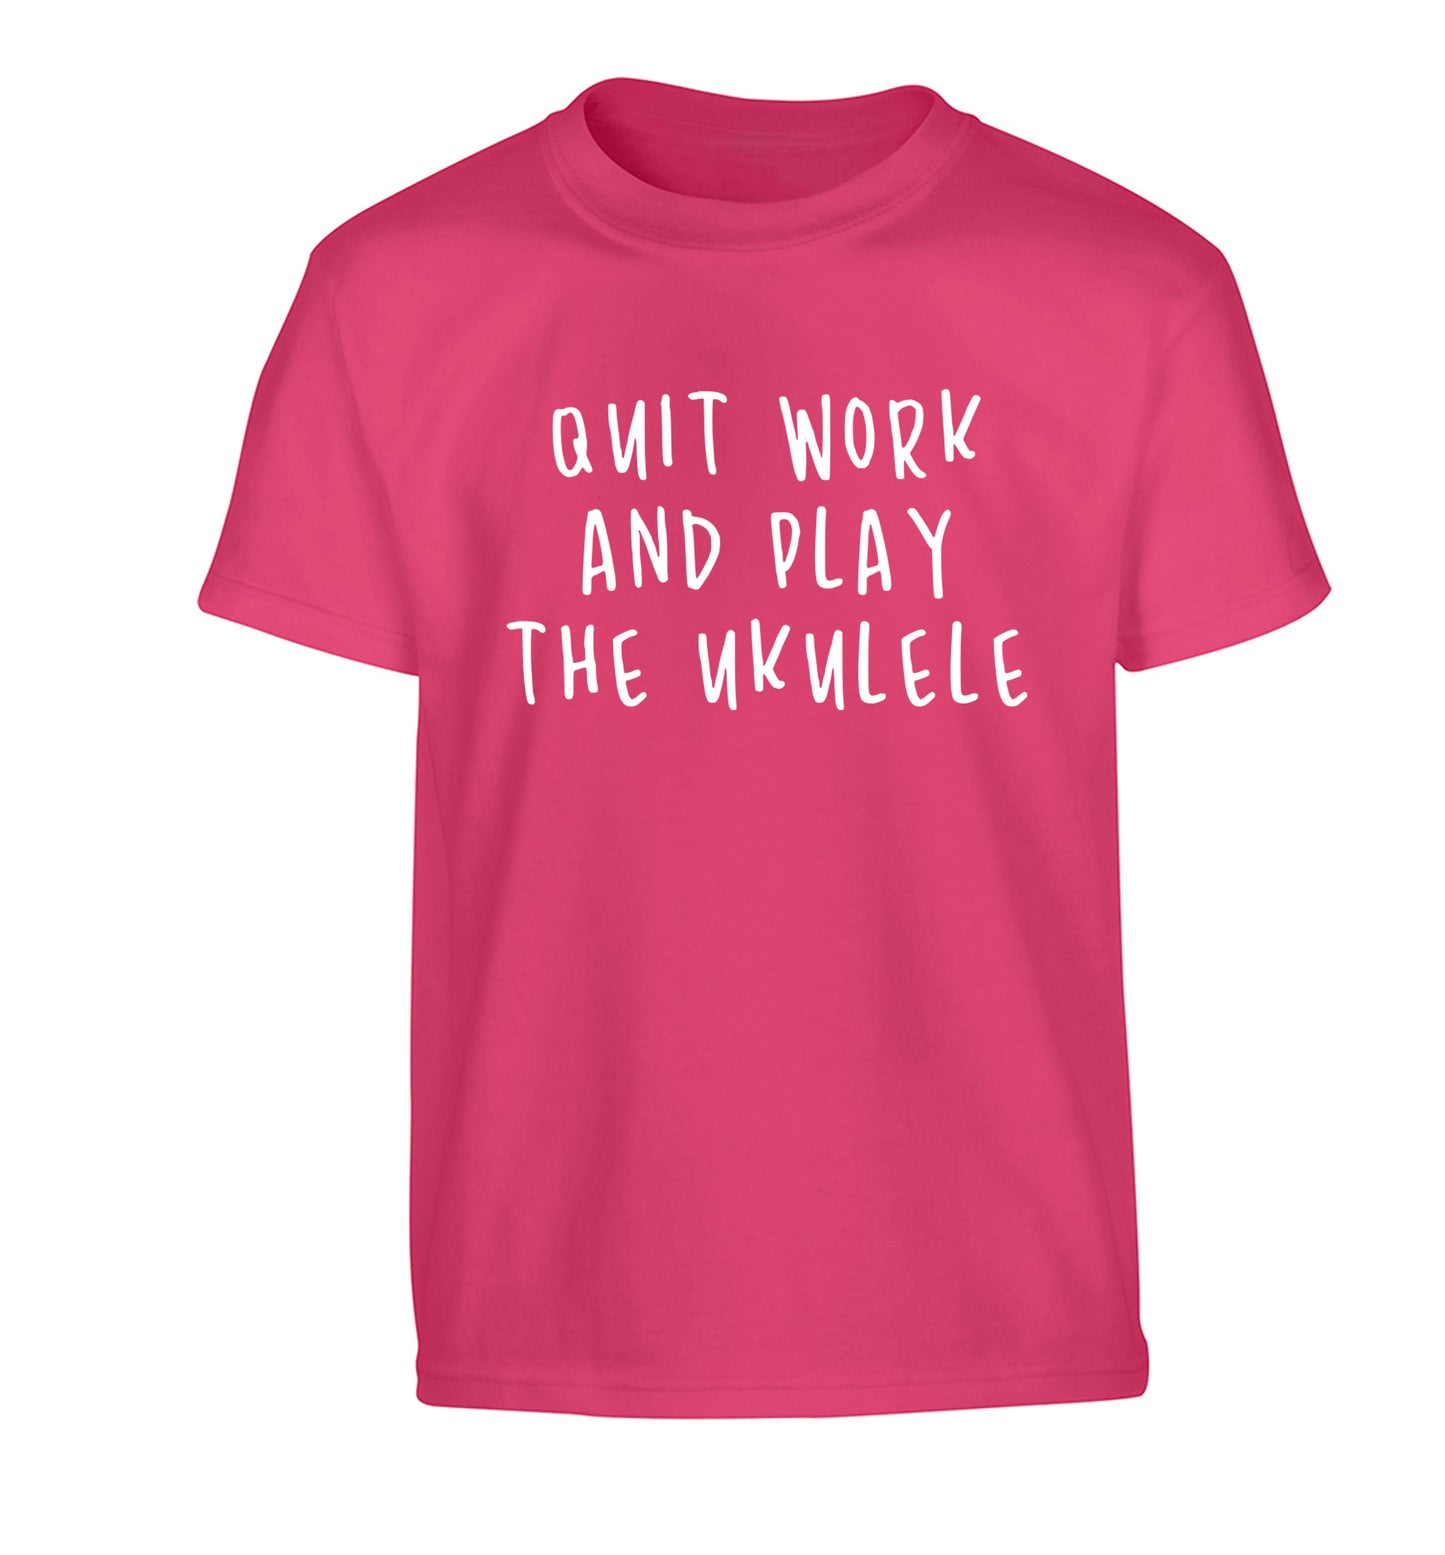 Quit work and play the ukulele Children's pink Tshirt 12-14 Years